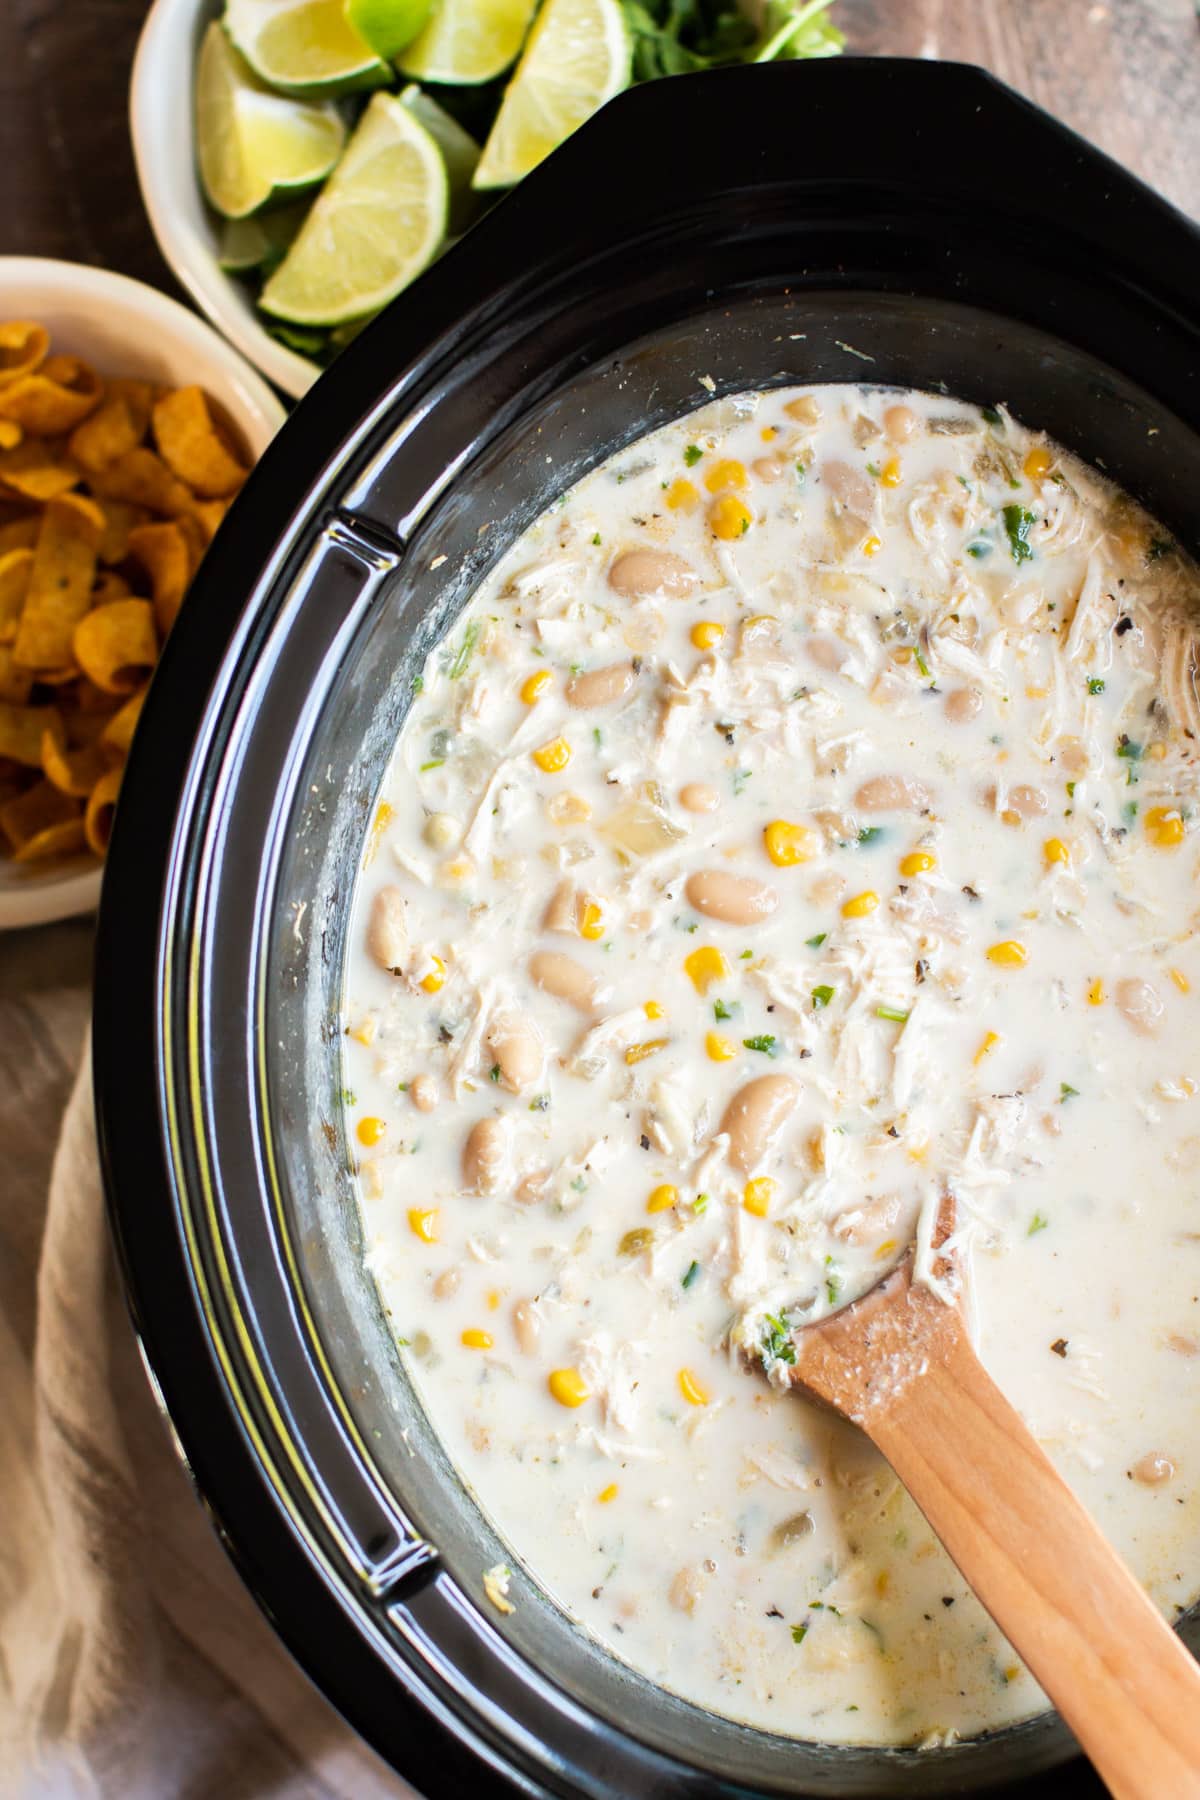 Creamy Slow Cooker White Chicken Chili Recipe - The Magical Slow Cooker